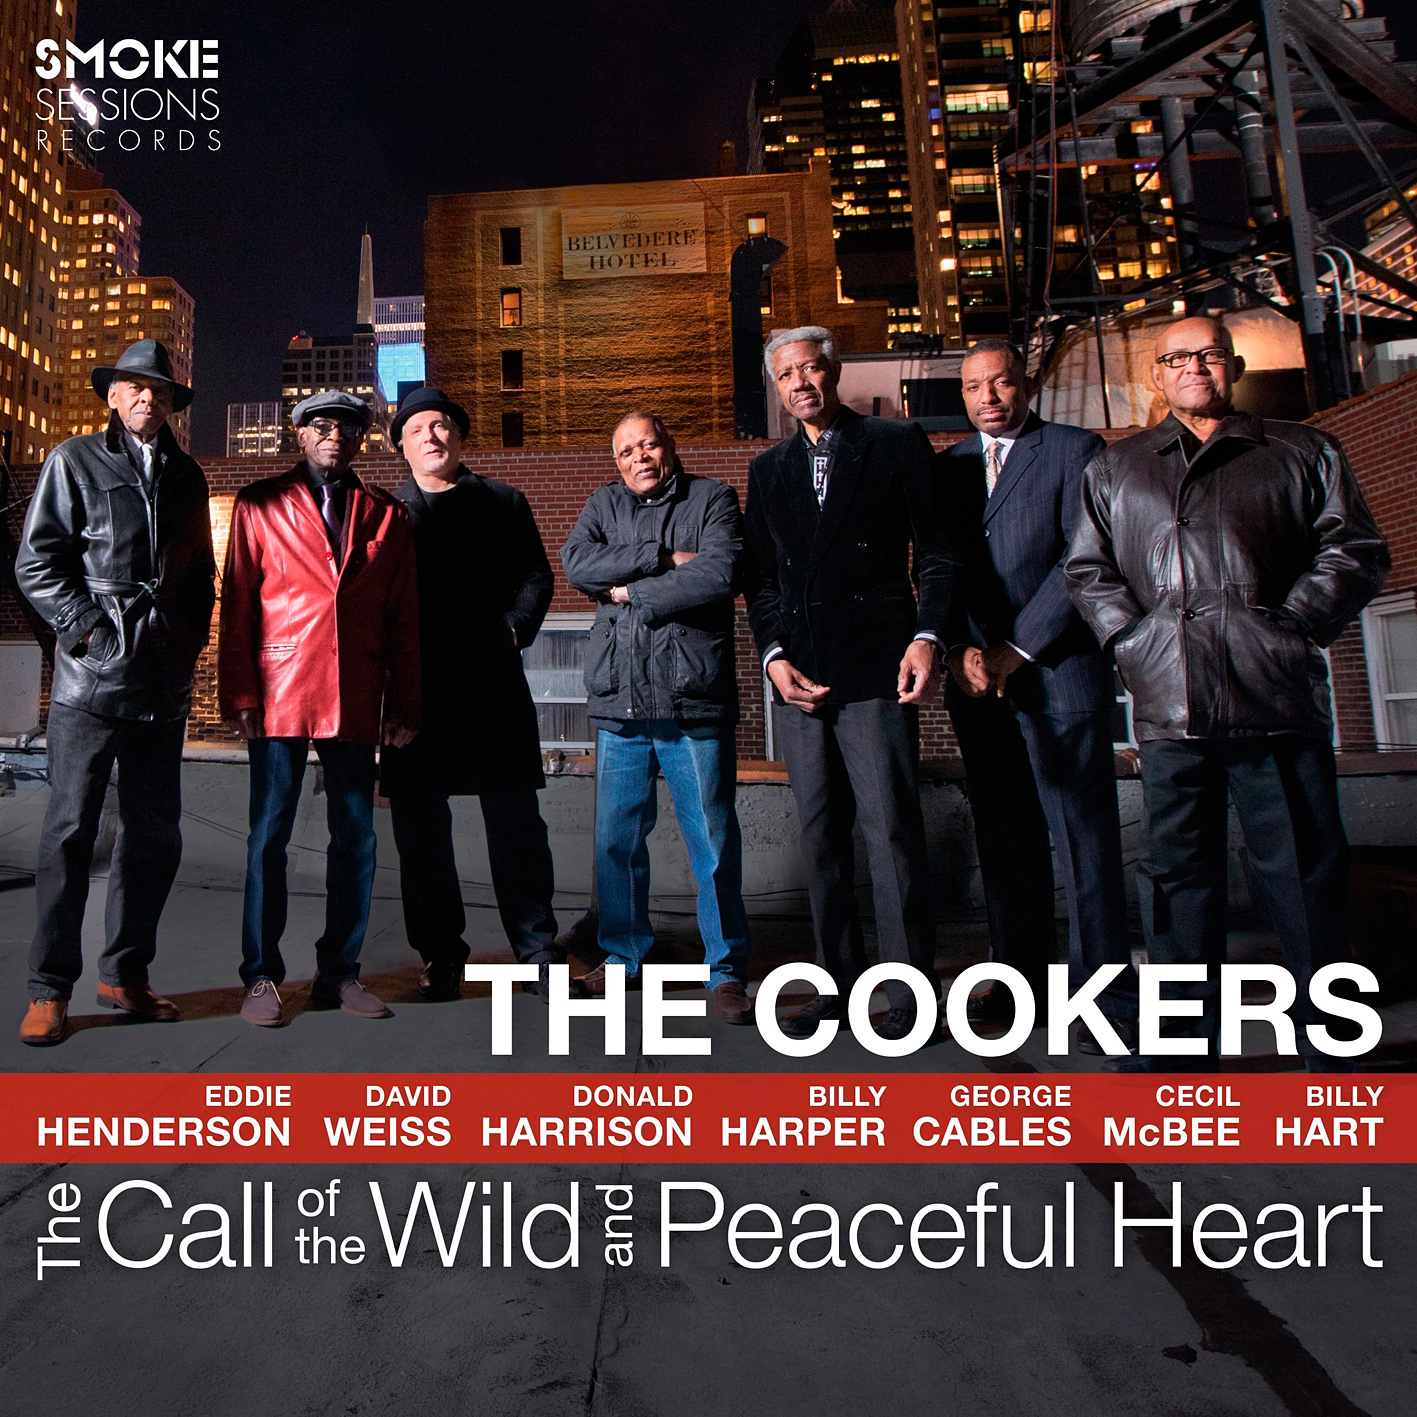 The Cookers - The Call Of The Wild And Peaceful Heart (2016) [HDTracks FLAC 24bit/96kHz]